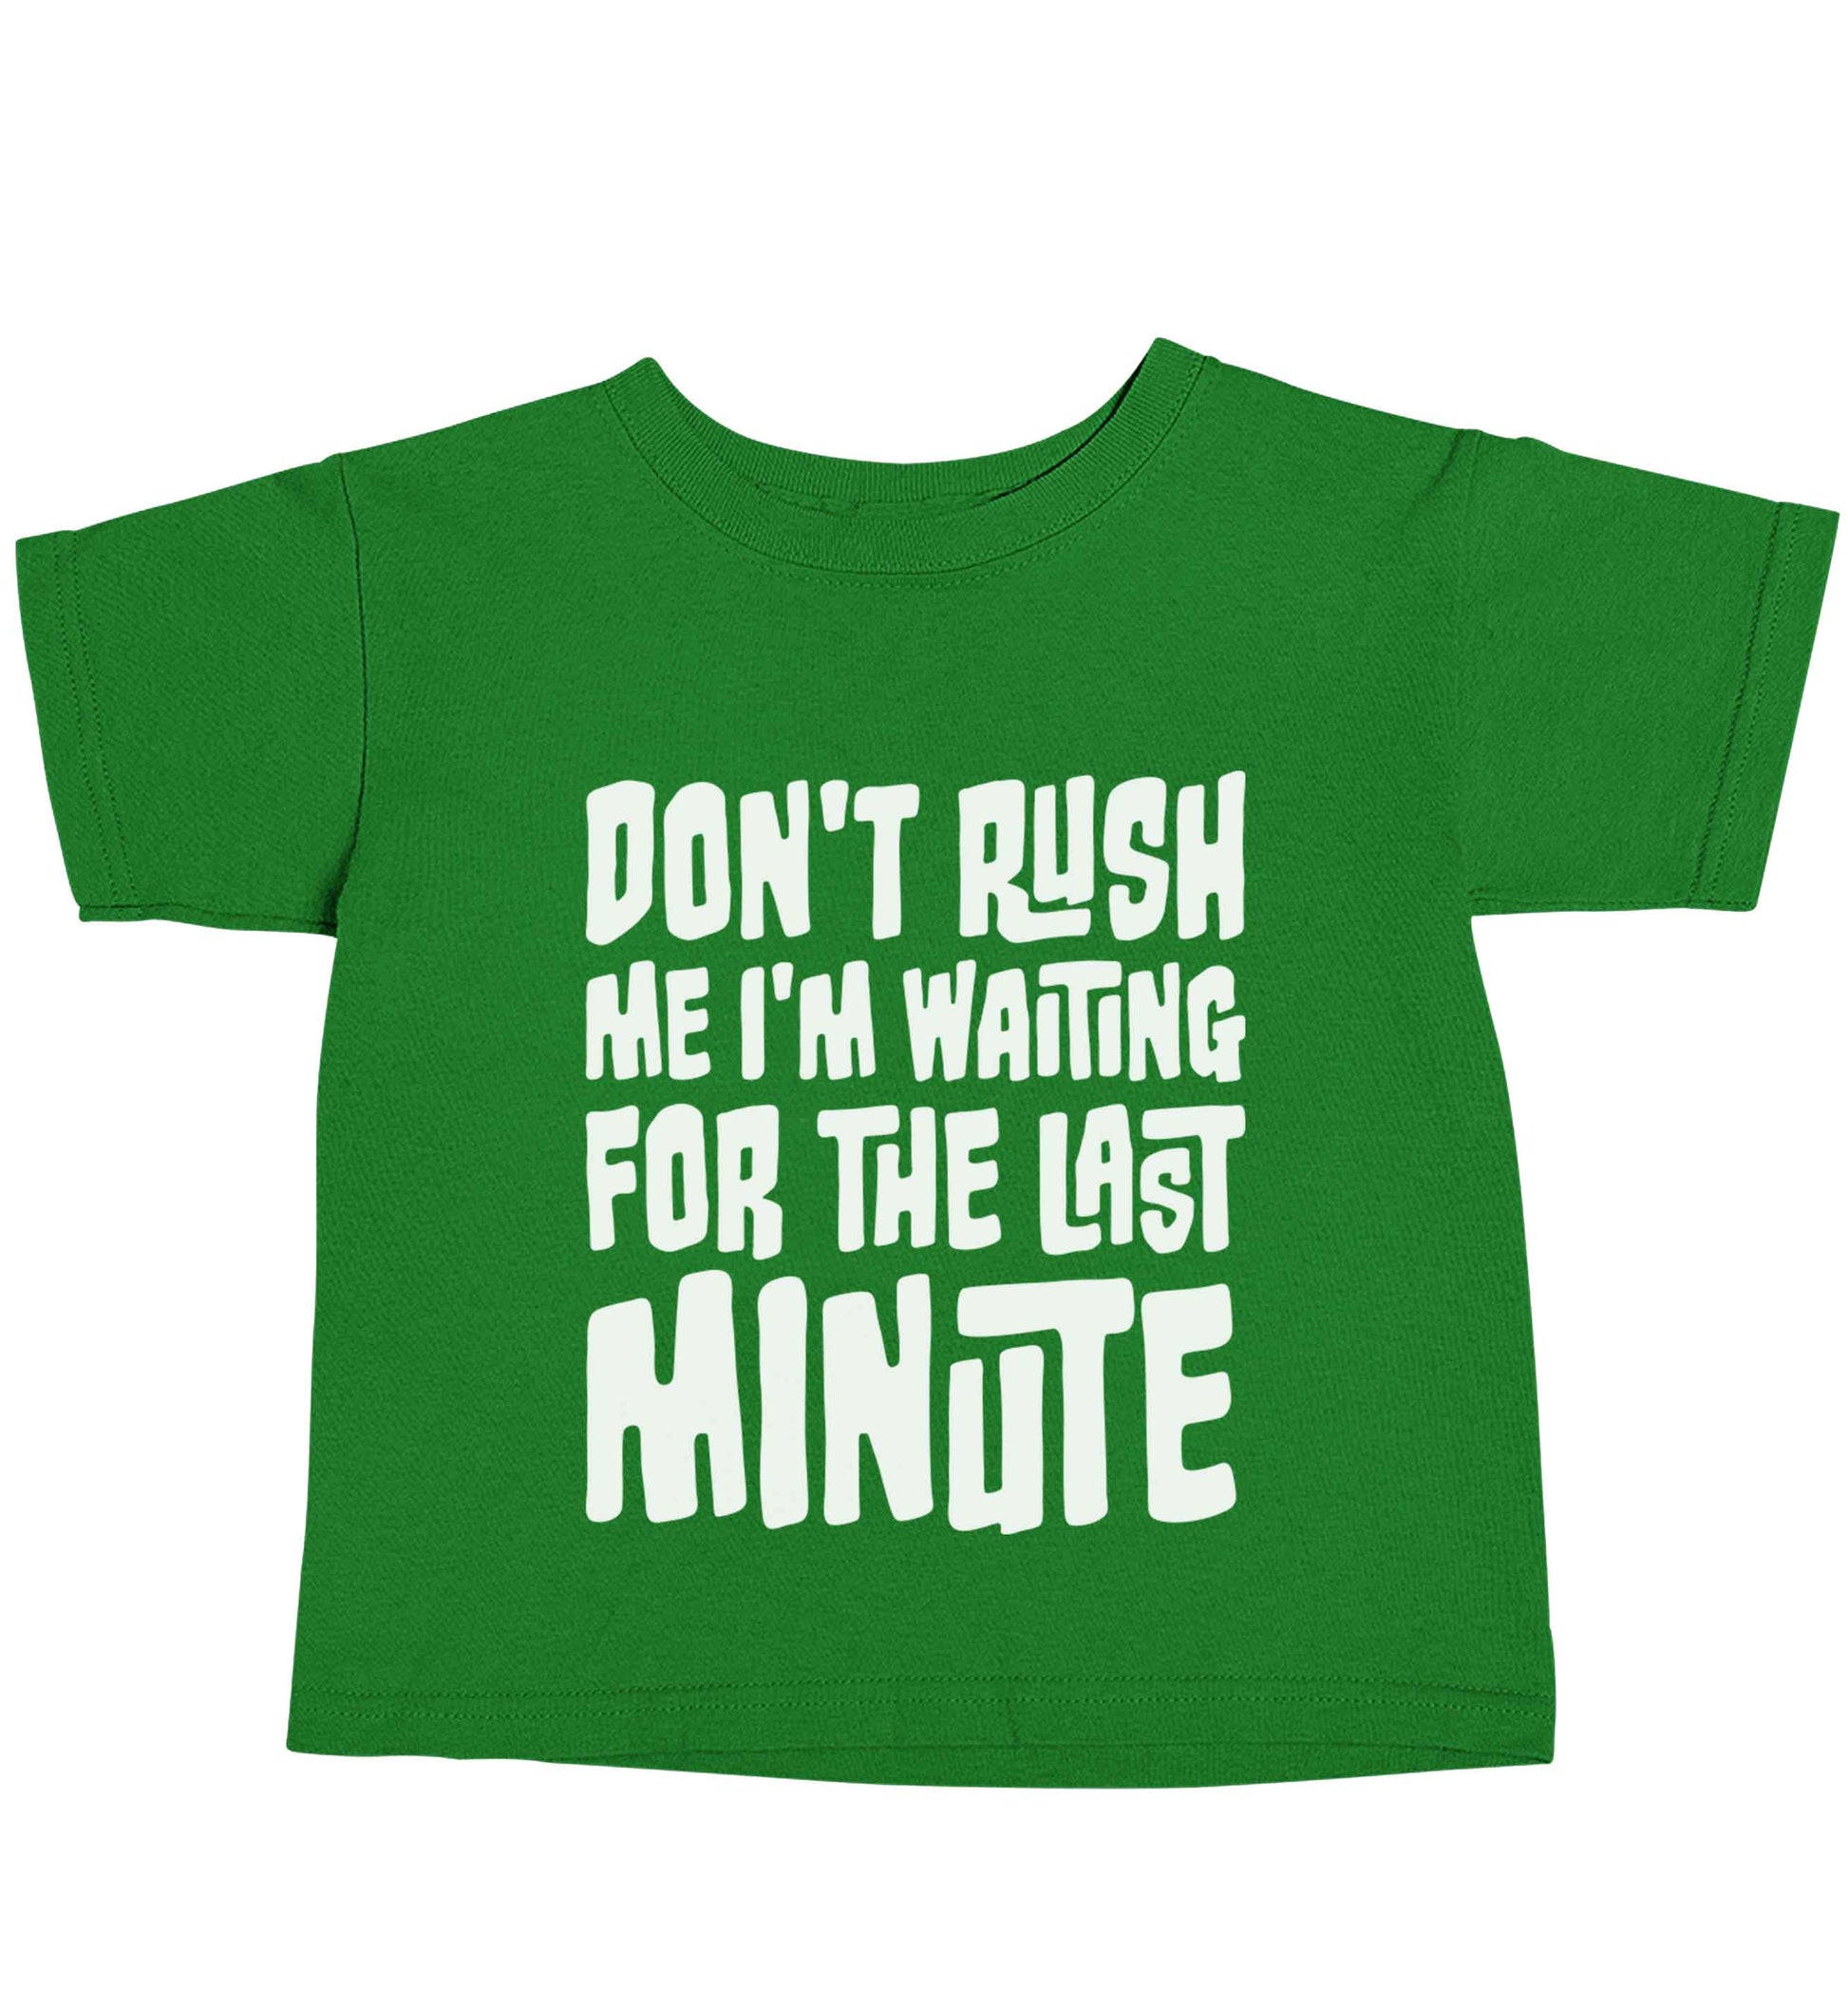 Don't rush me I'm waiting for the last minute green baby toddler Tshirt 2 Years